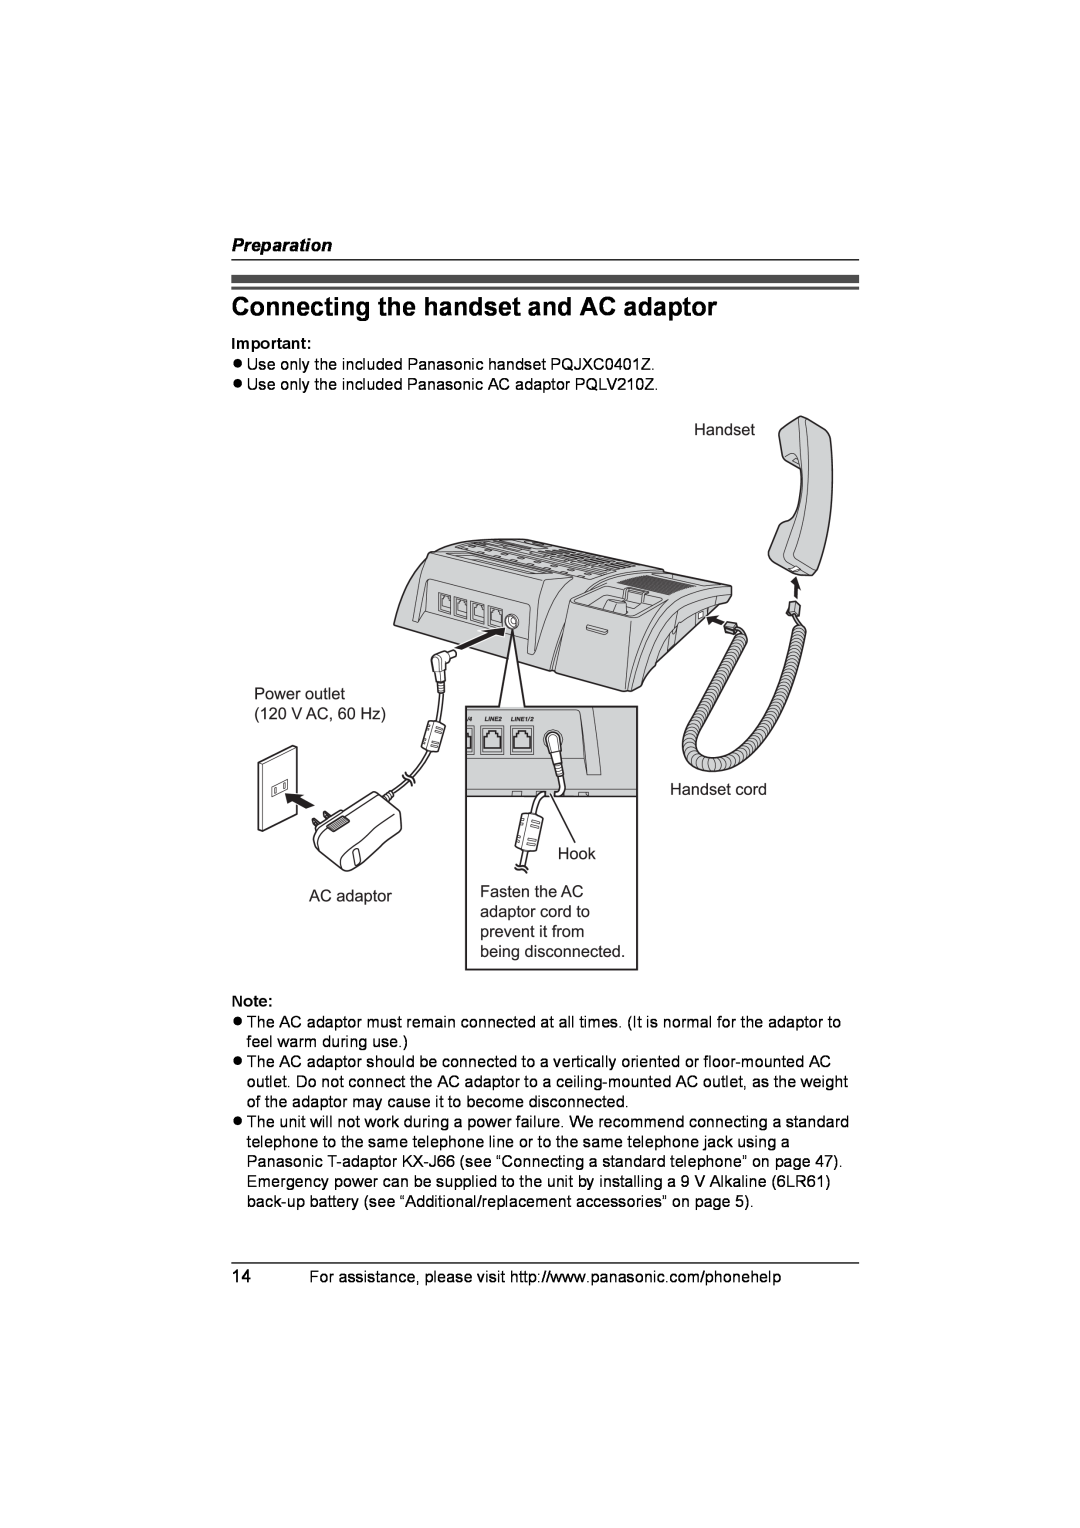 Panasonic KX-TS4100 operating instructions Connecting the handset and AC adaptor, Preparation 